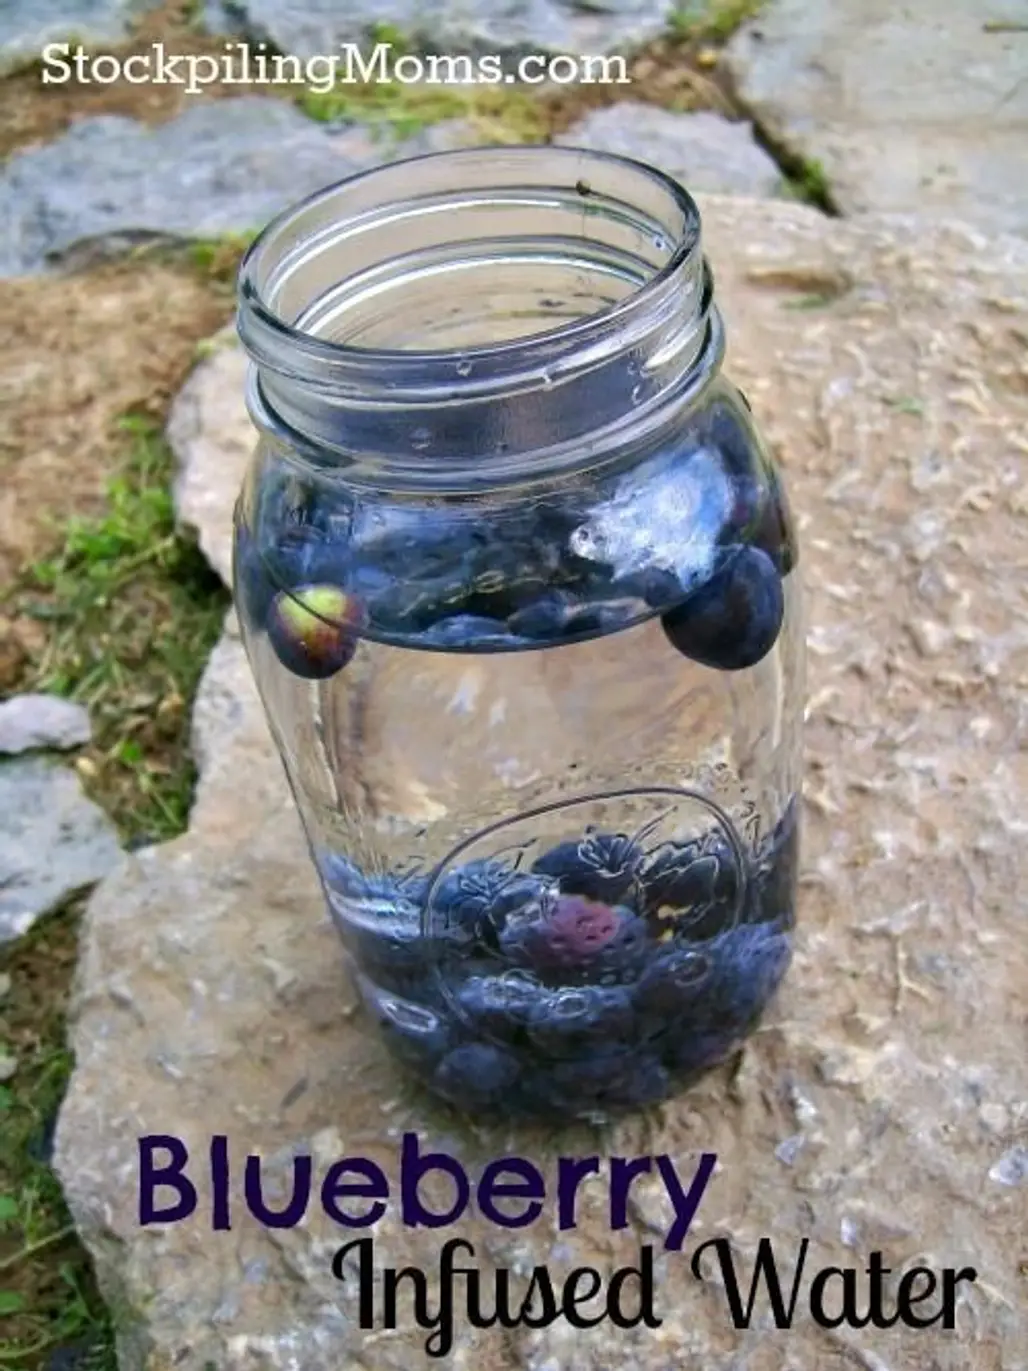 Blueberry Infused Water